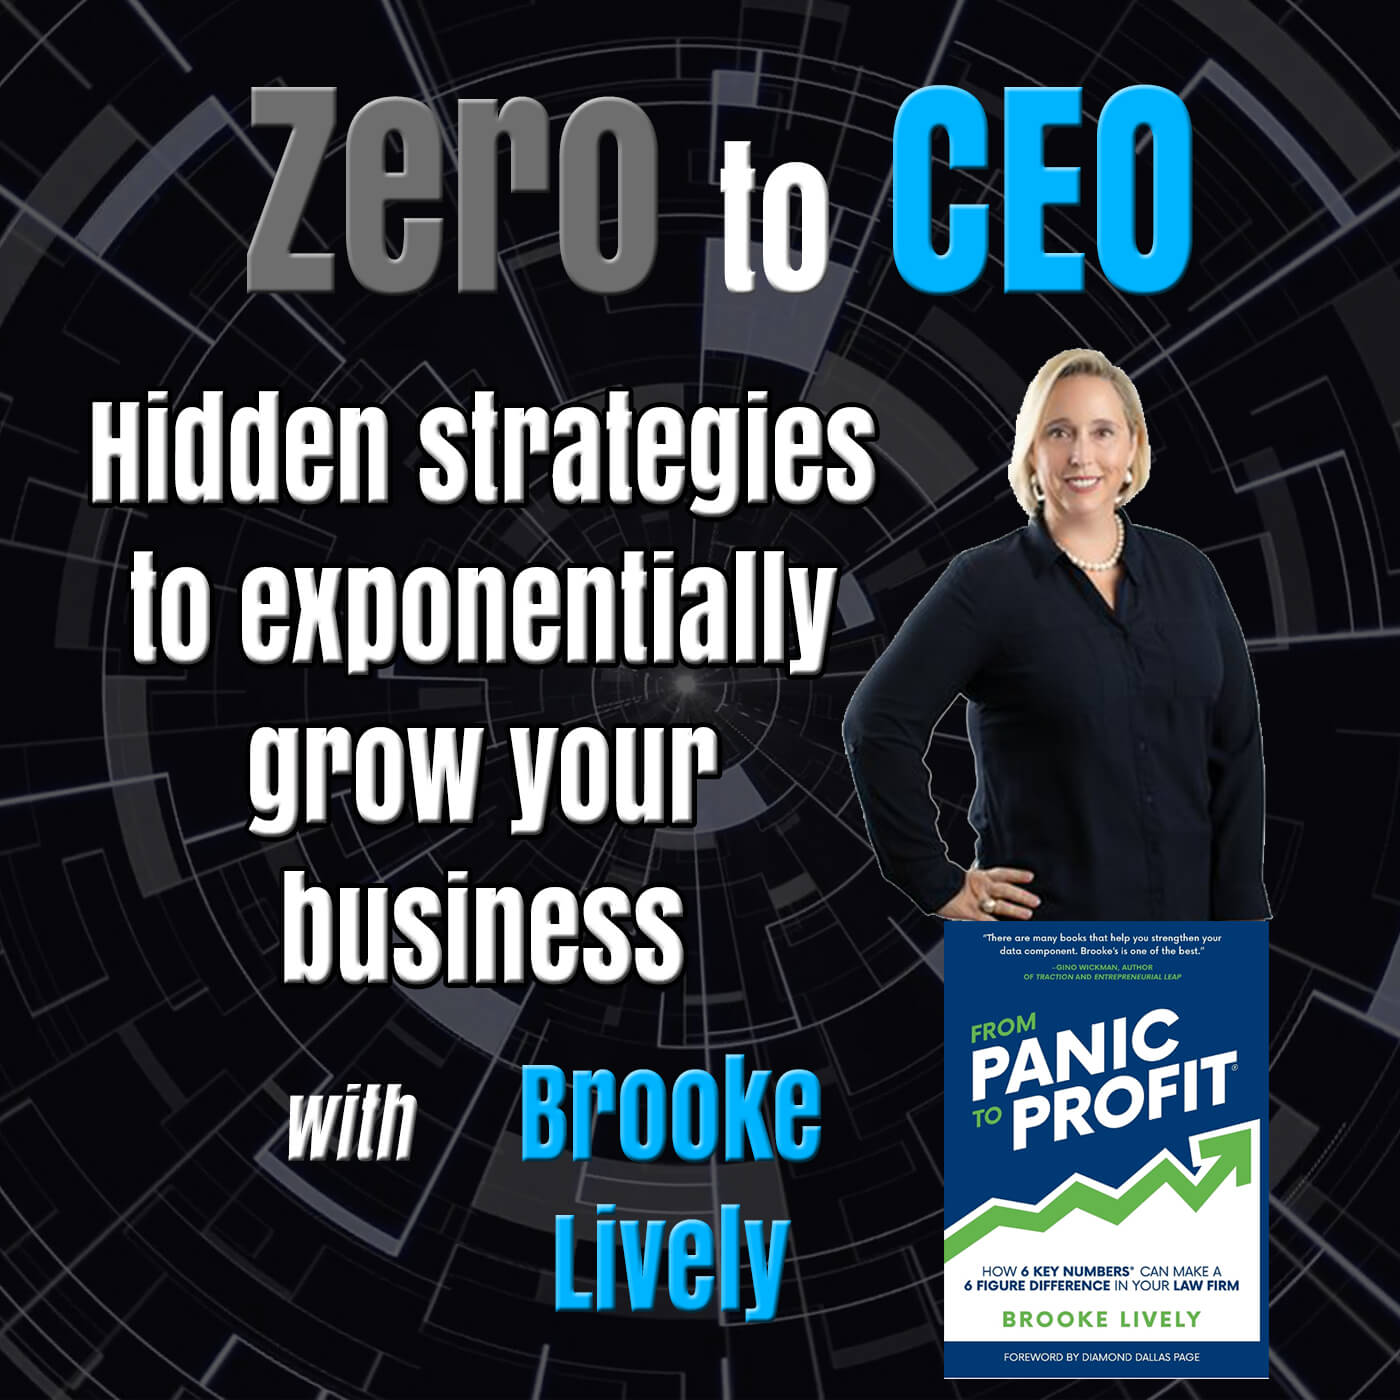 Zero to CEO: Hidden strategies to exponentially grow your business with Brooke Lively